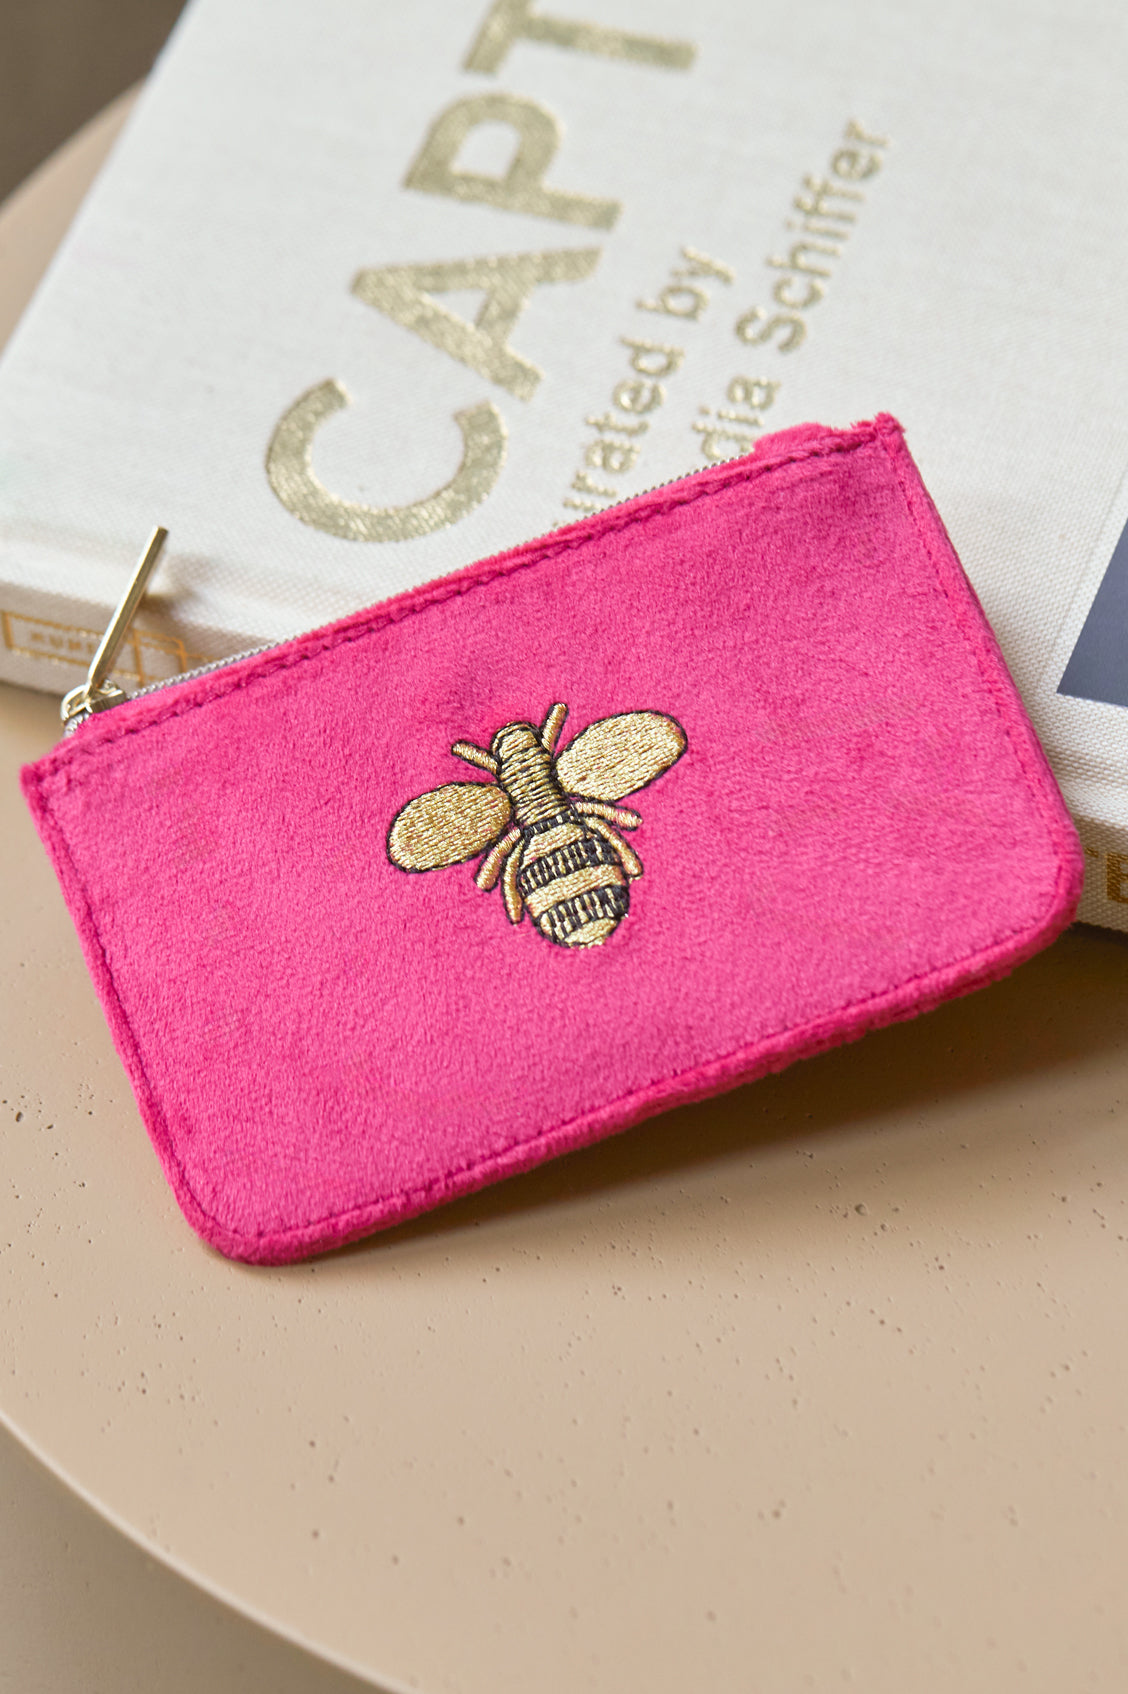 Embroidered Bee Card Purse